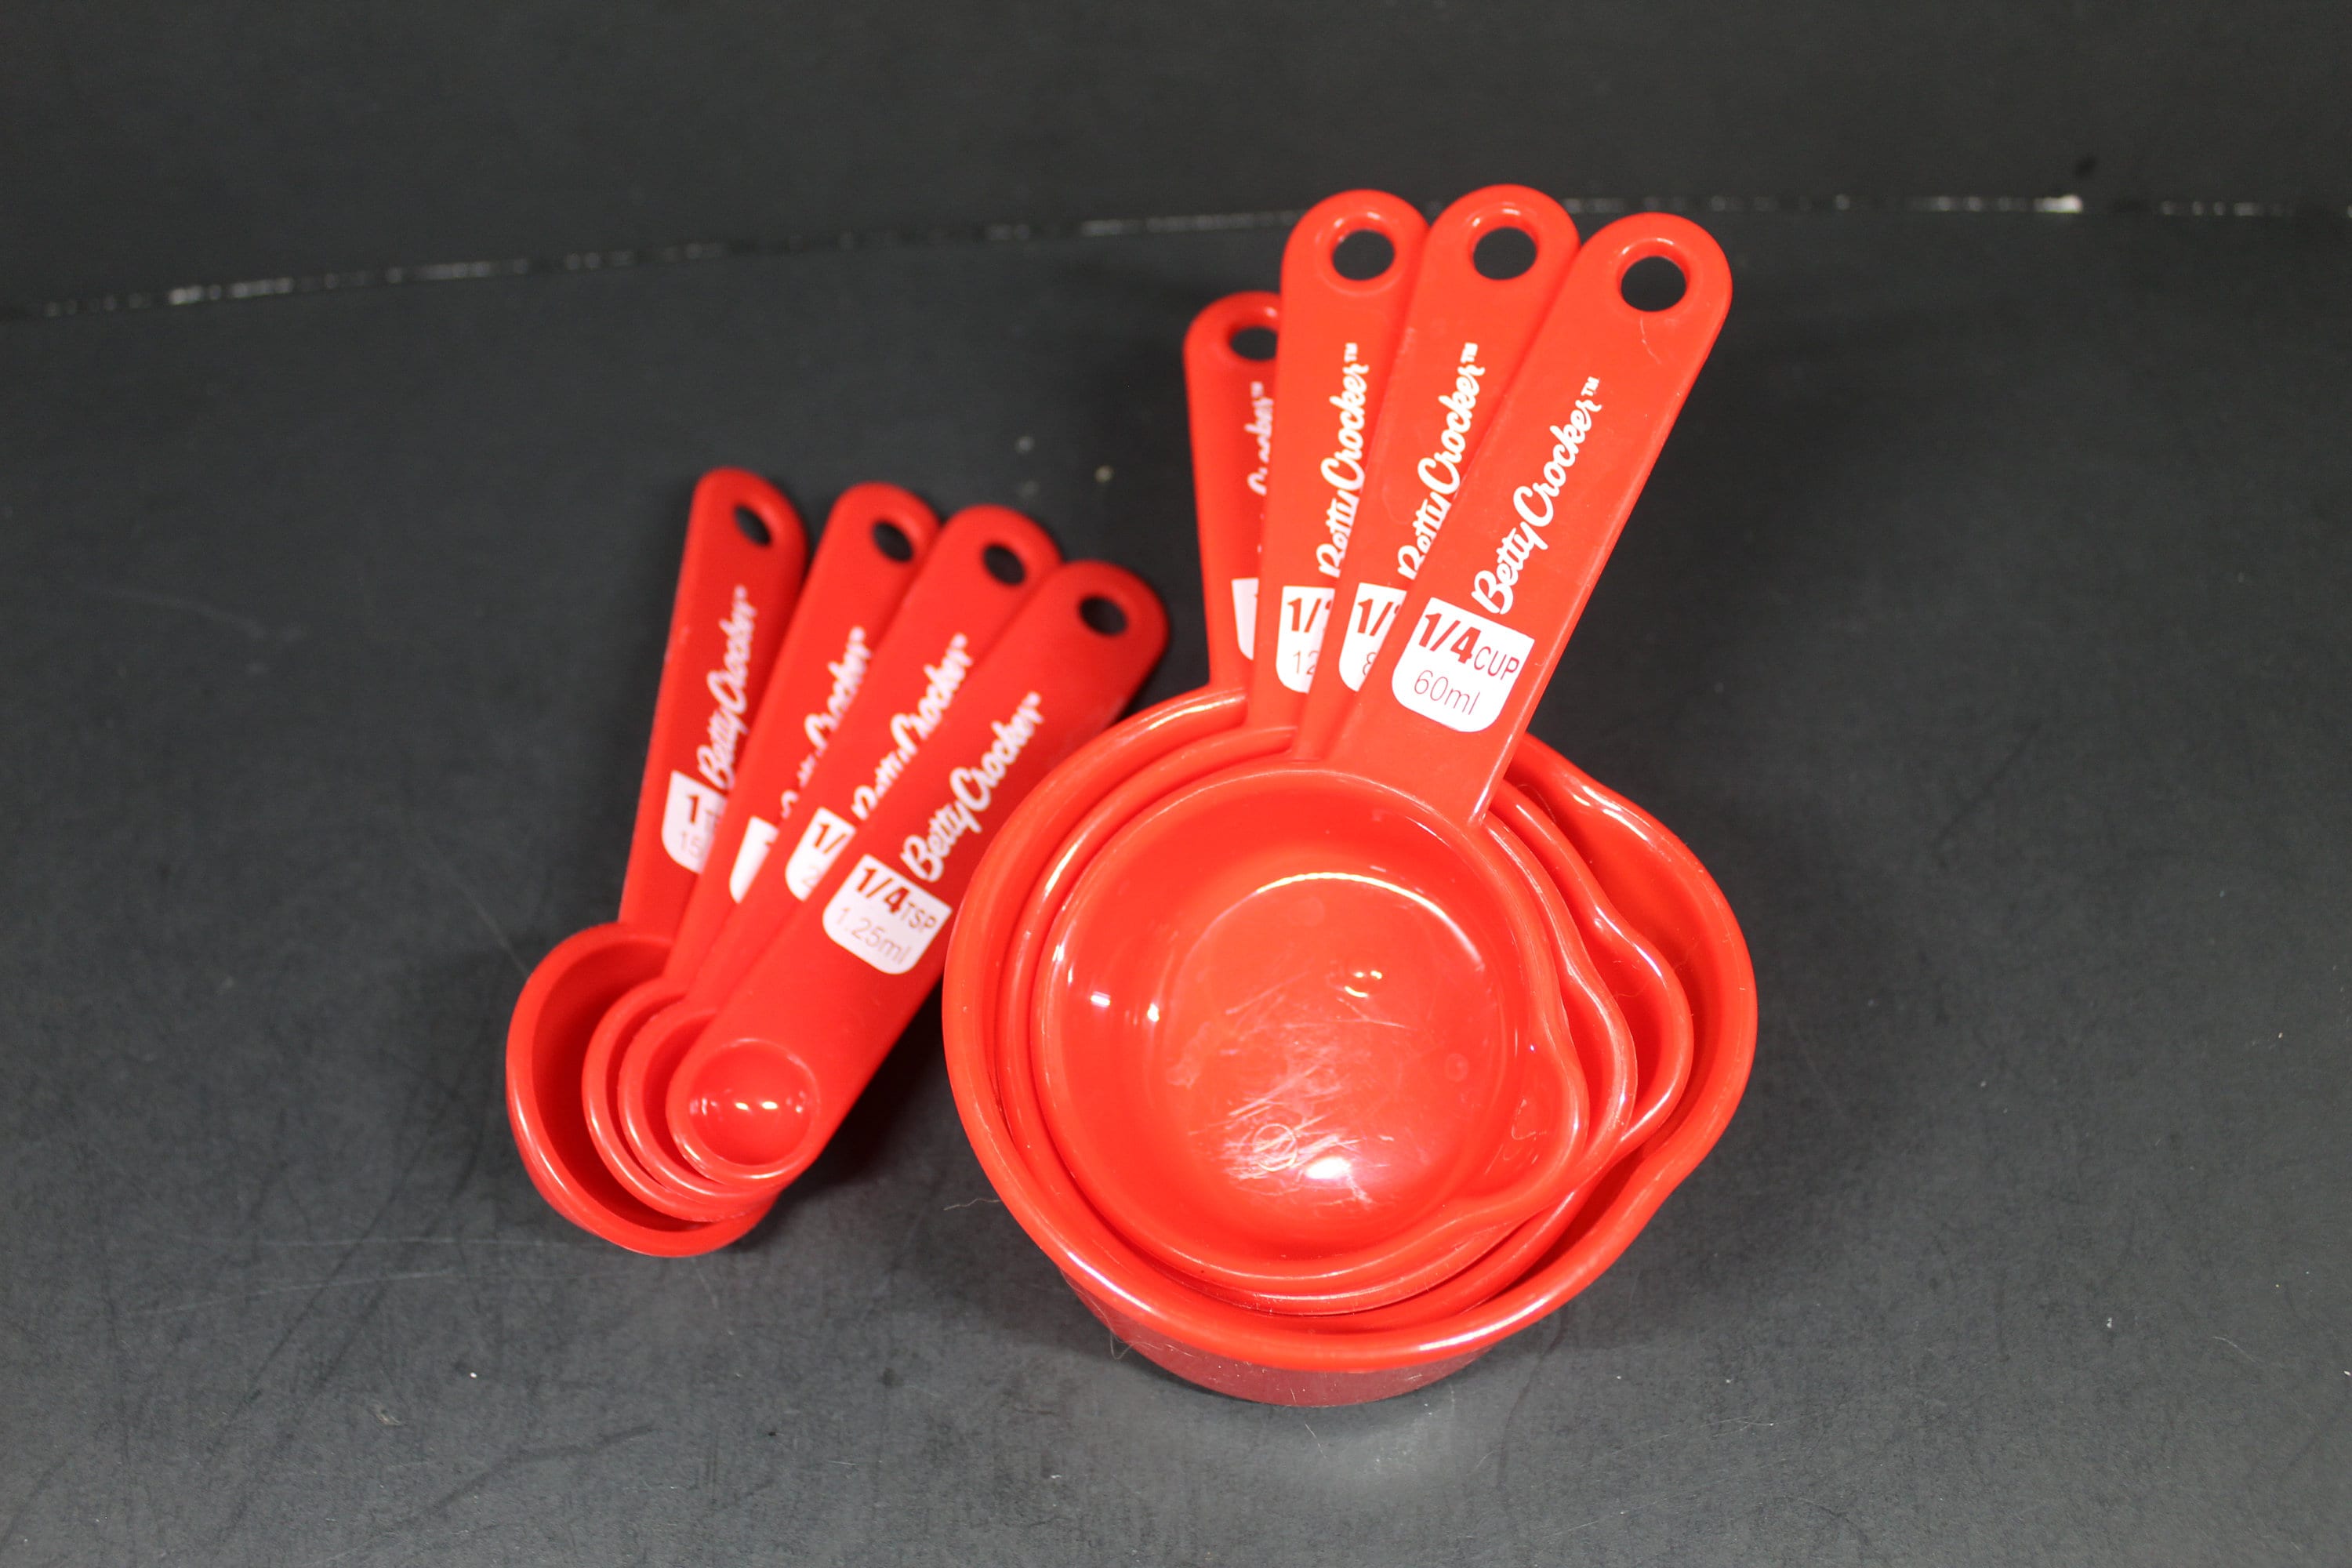 Betty Crocker Red MEASURING CUPS AND MEASURING SPOONS 8 PIECE SET - NEW